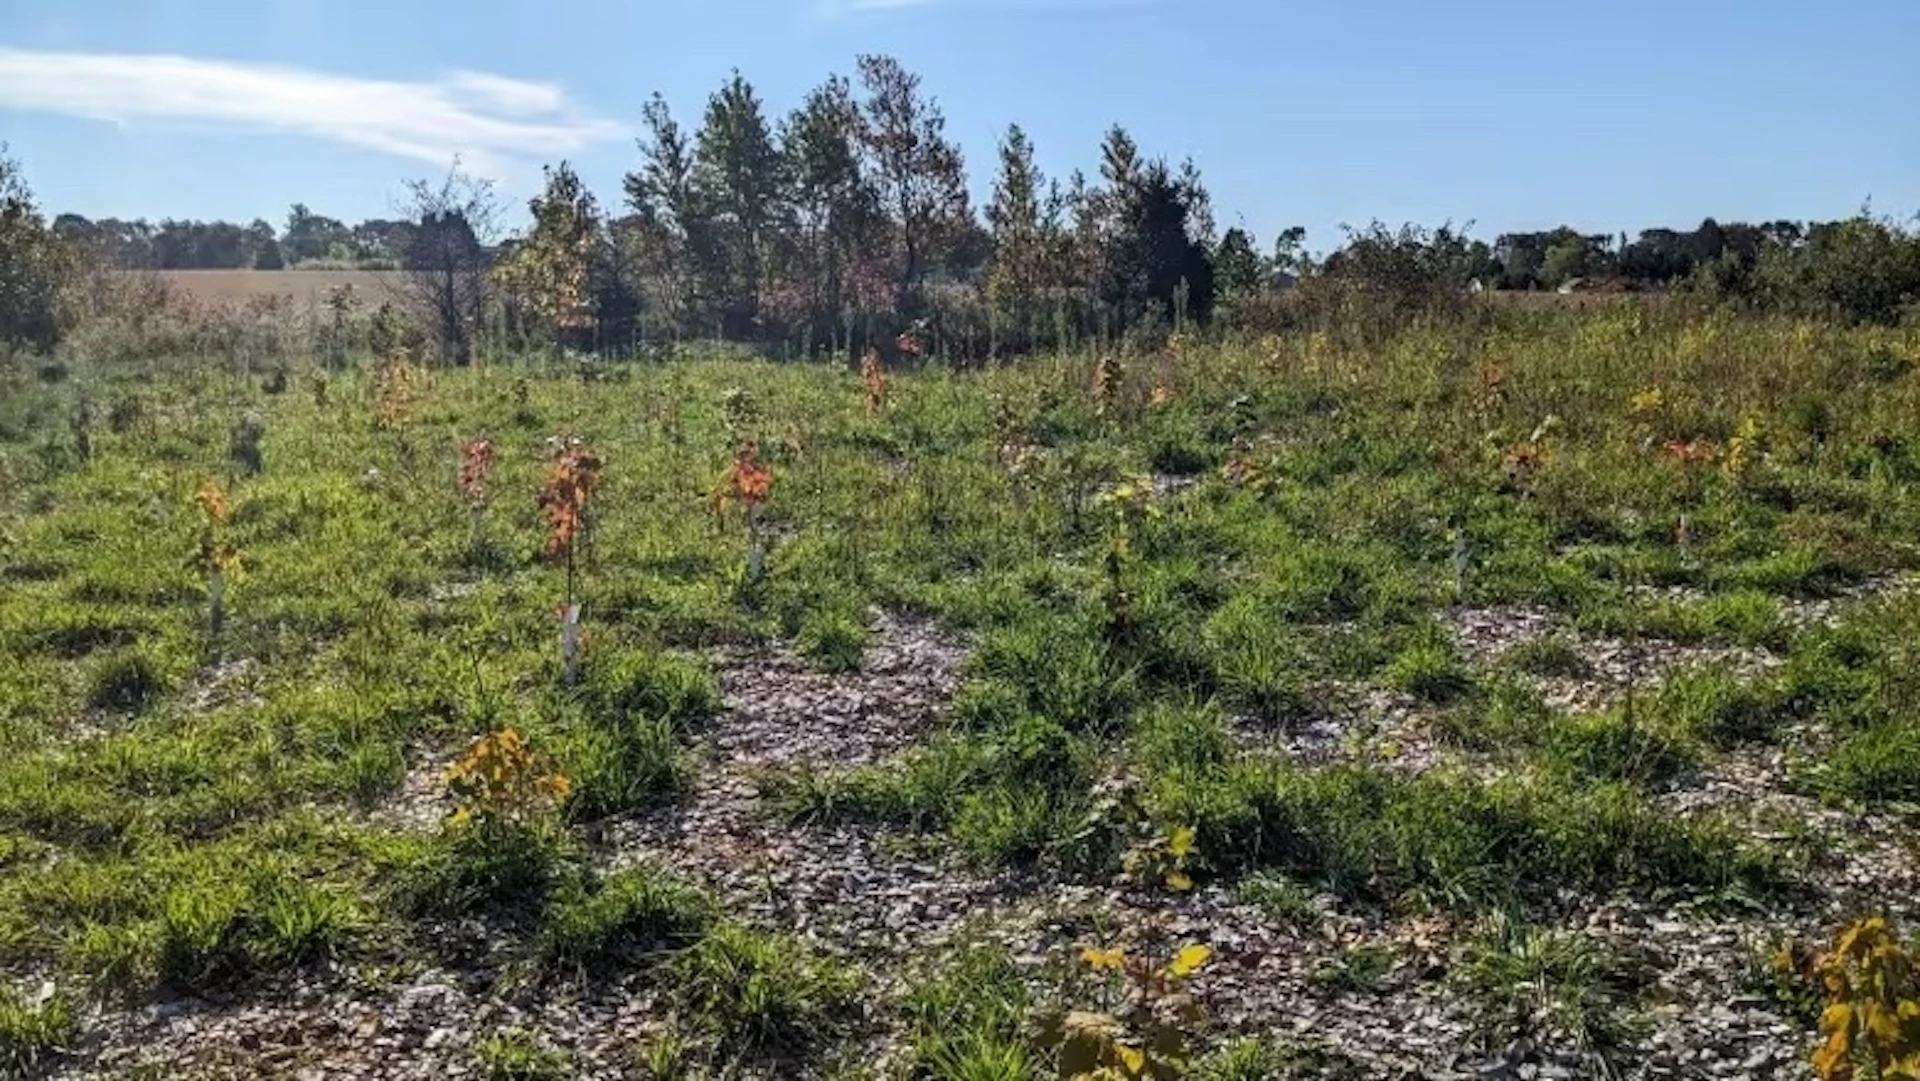 Charlottetown experiments with mini forests to speed up growth